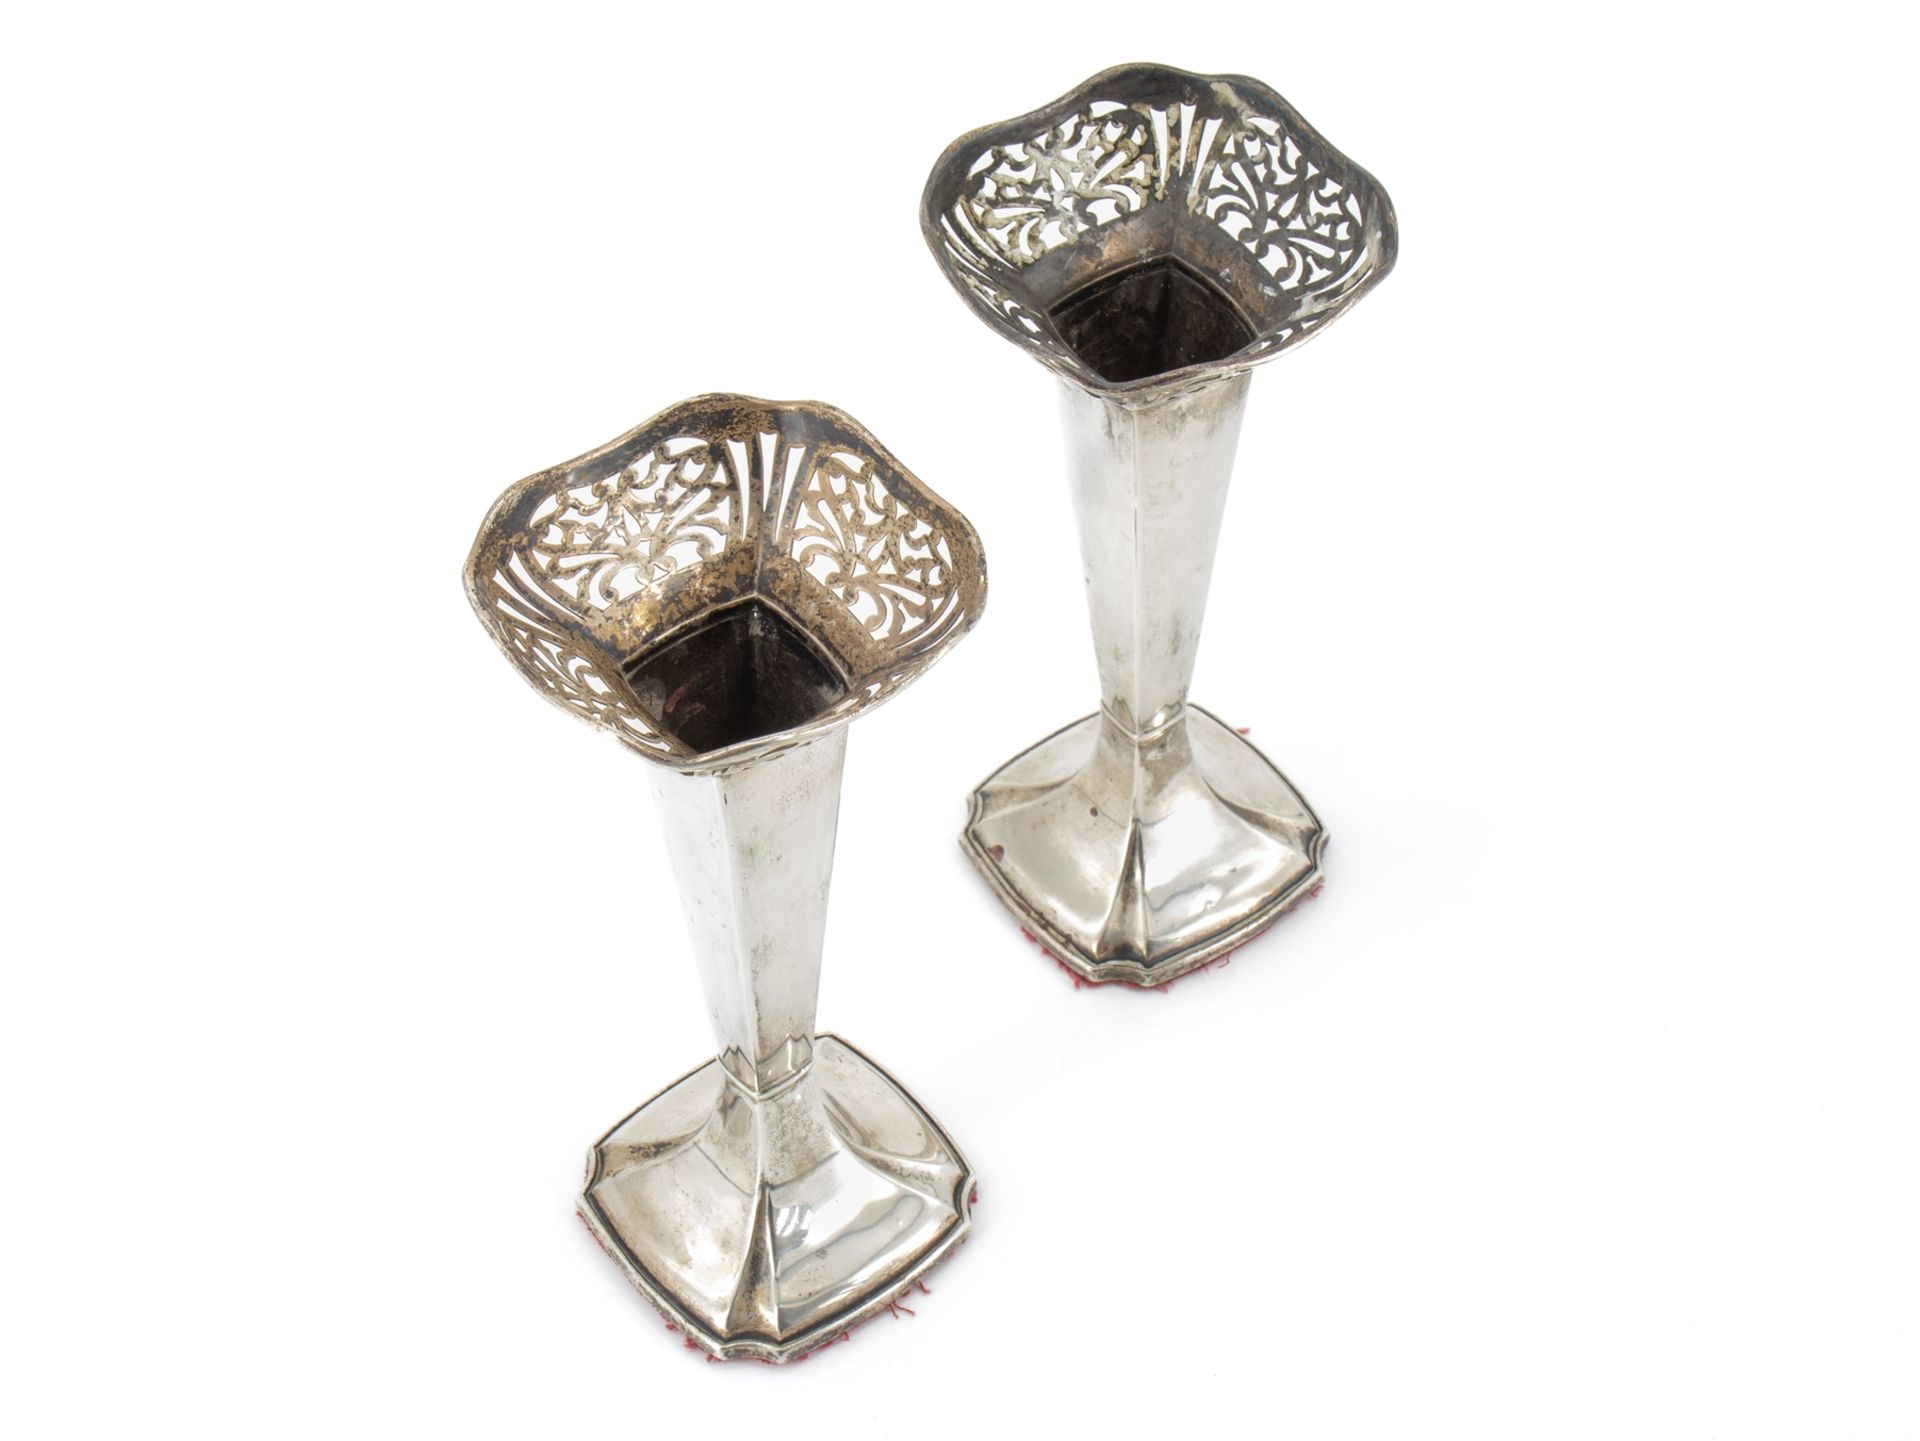 Pair of vases, 925 sterling silver, England, Sheffield, 1916. - Image 4 of 6